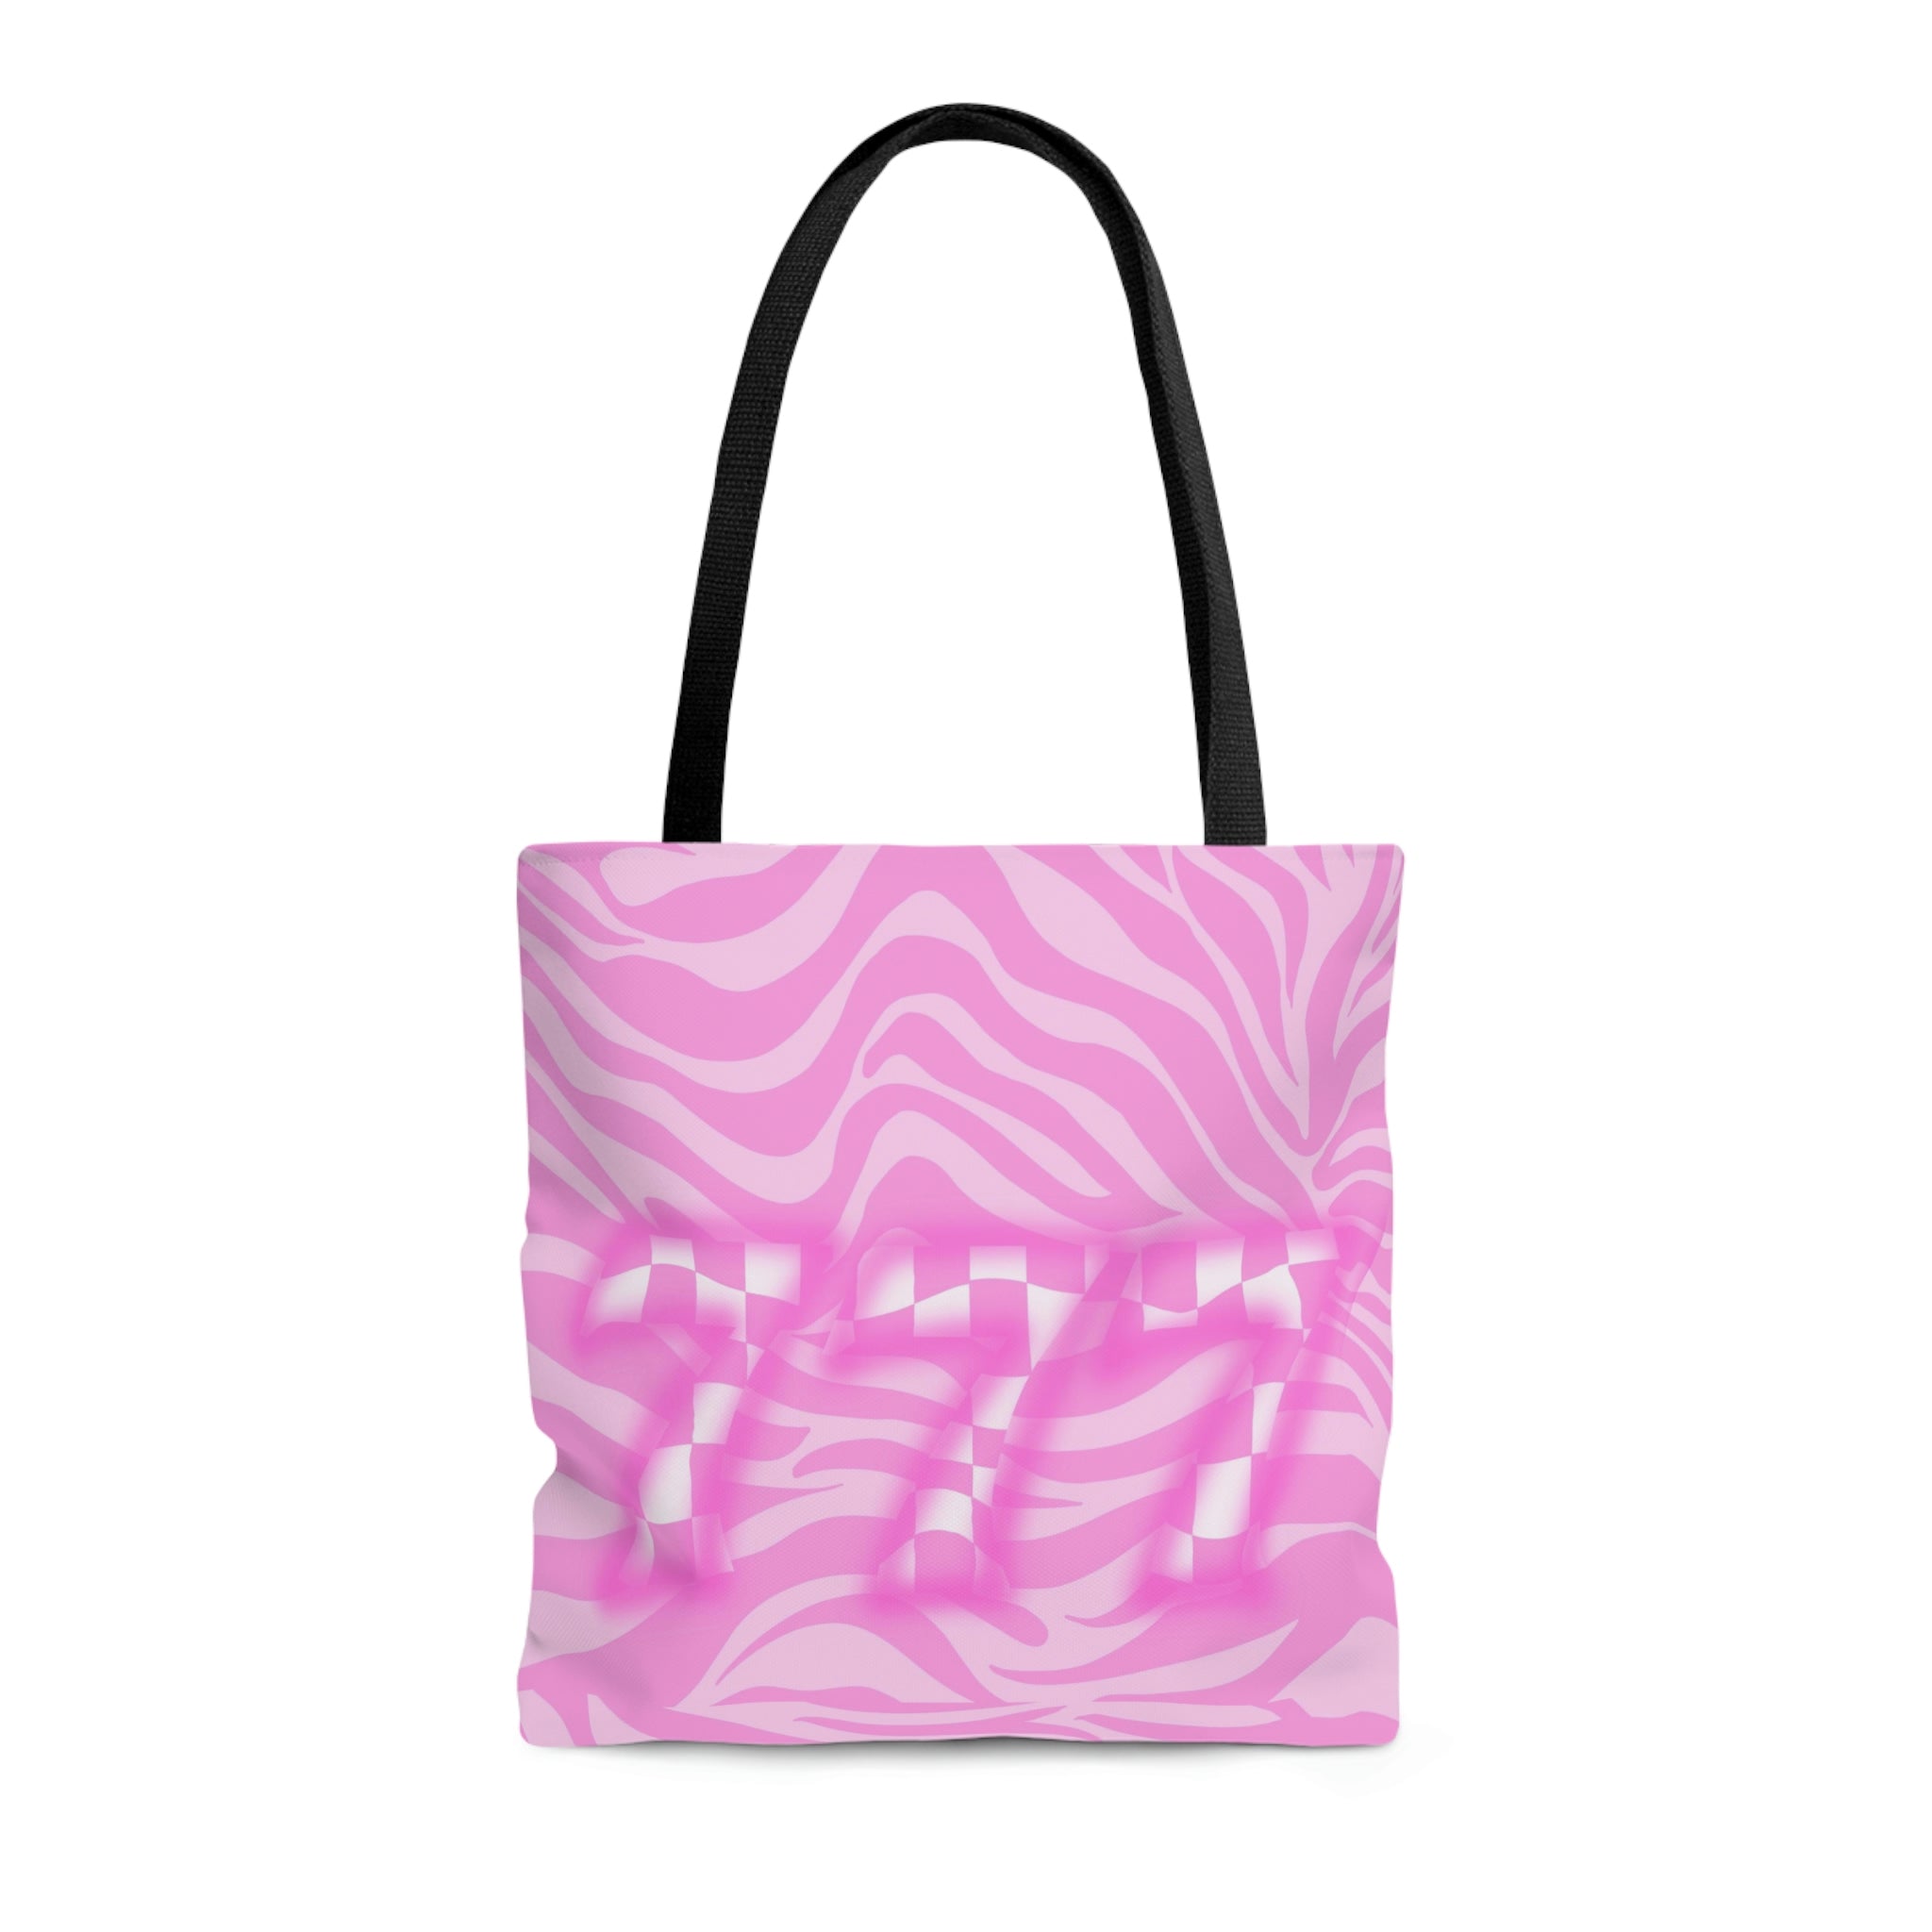 Zebra Bag Number 4 – VERY TROUBLED CHILD